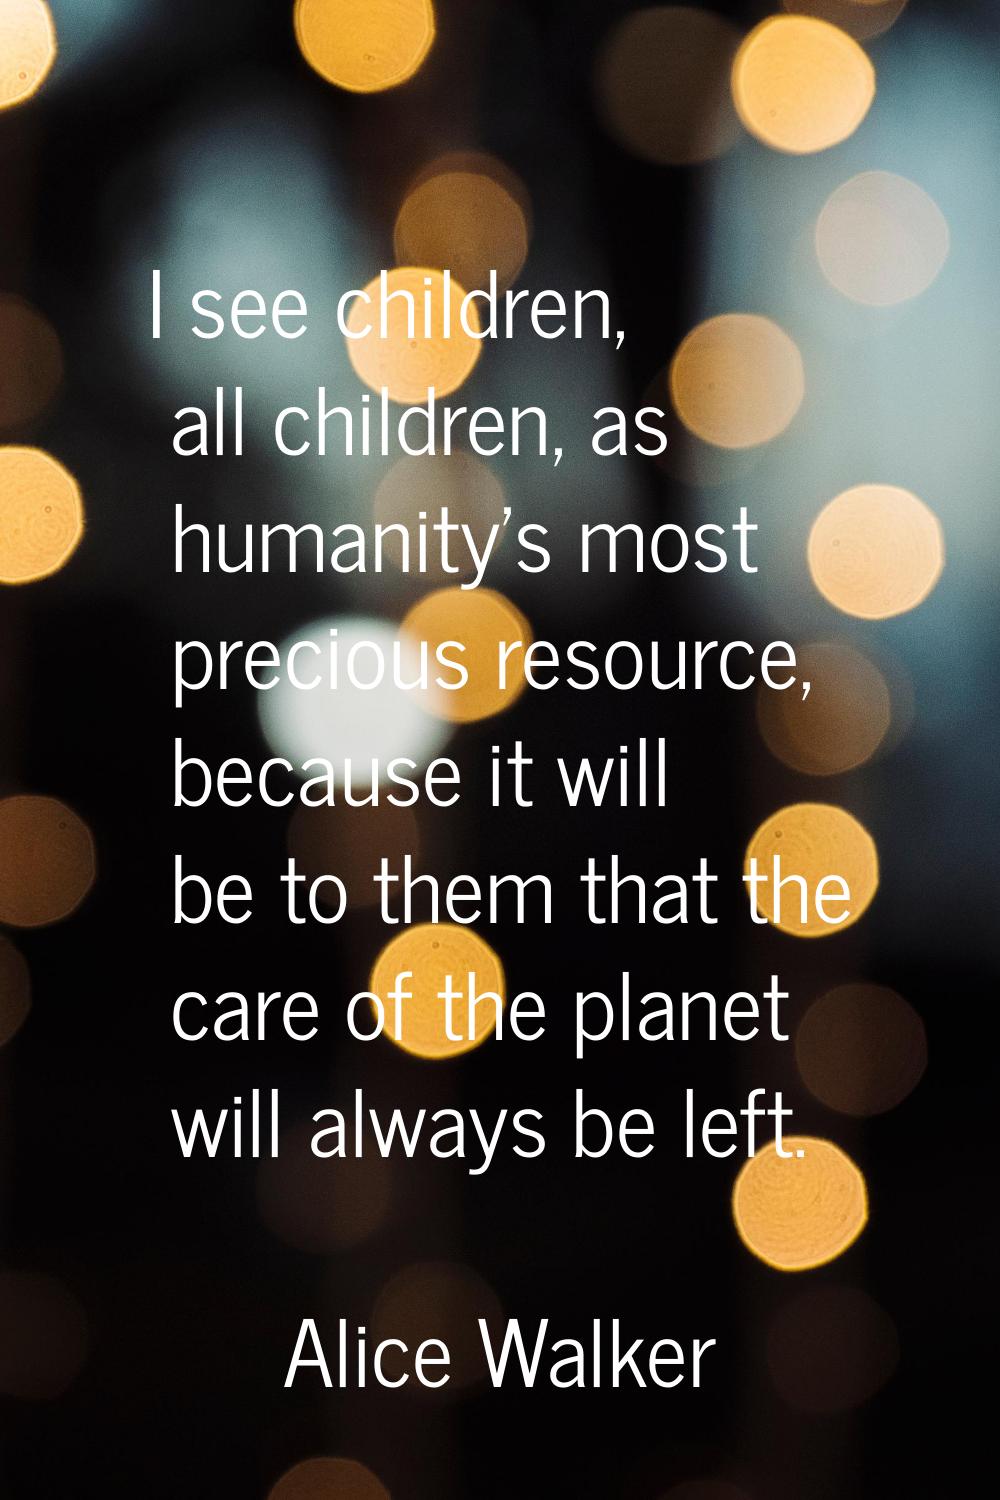 I see children, all children, as humanity's most precious resource, because it will be to them that